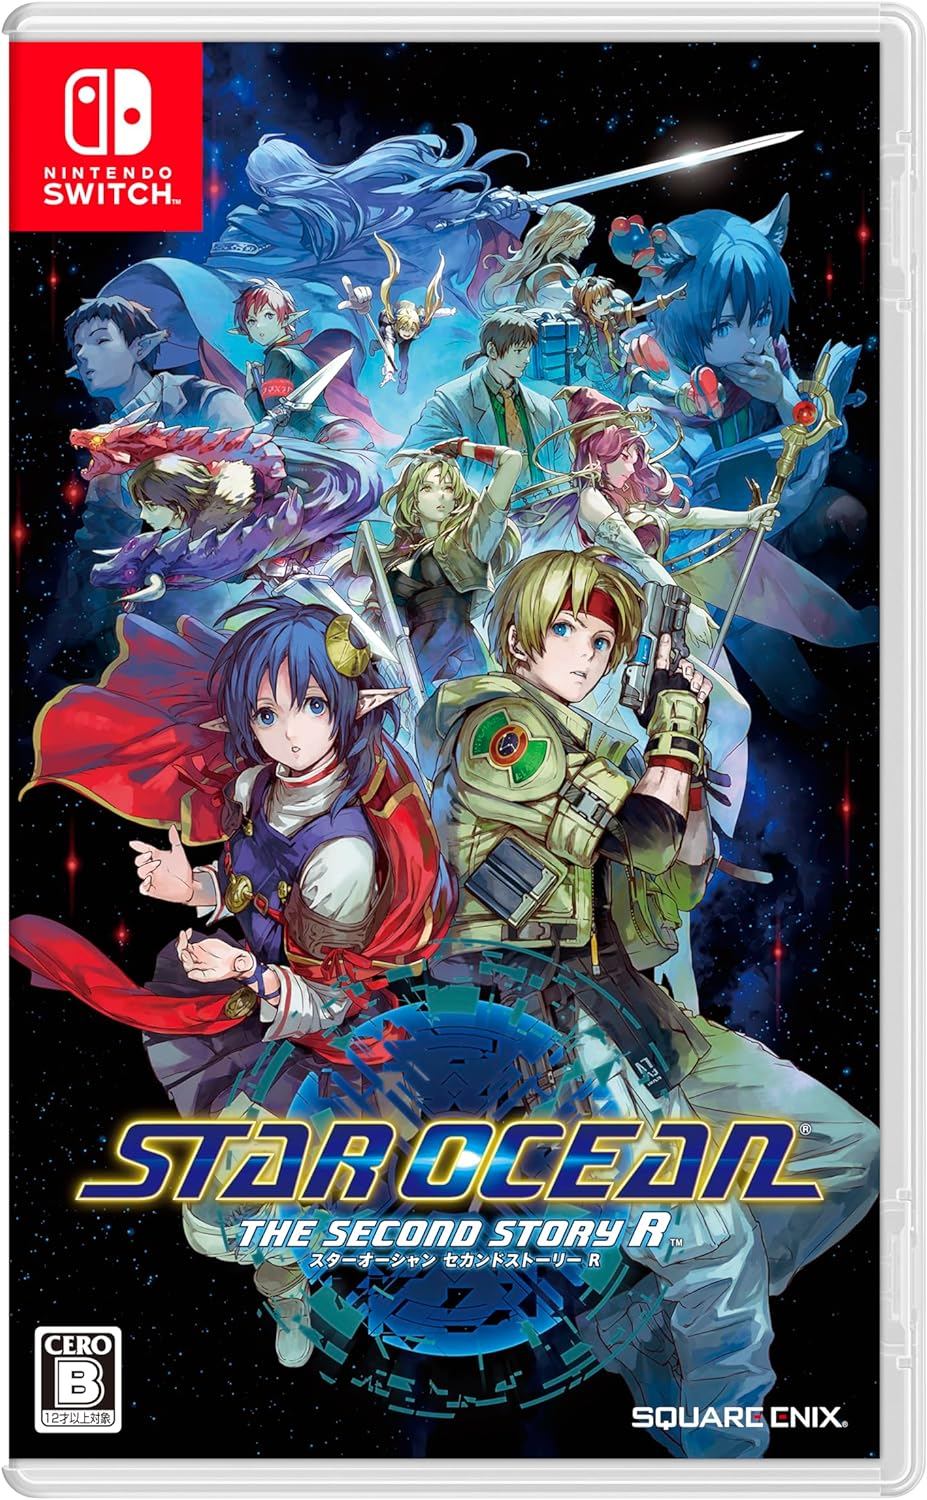 R Star The Switch Nintendo Story for Ocean: Second (Multi-Language)